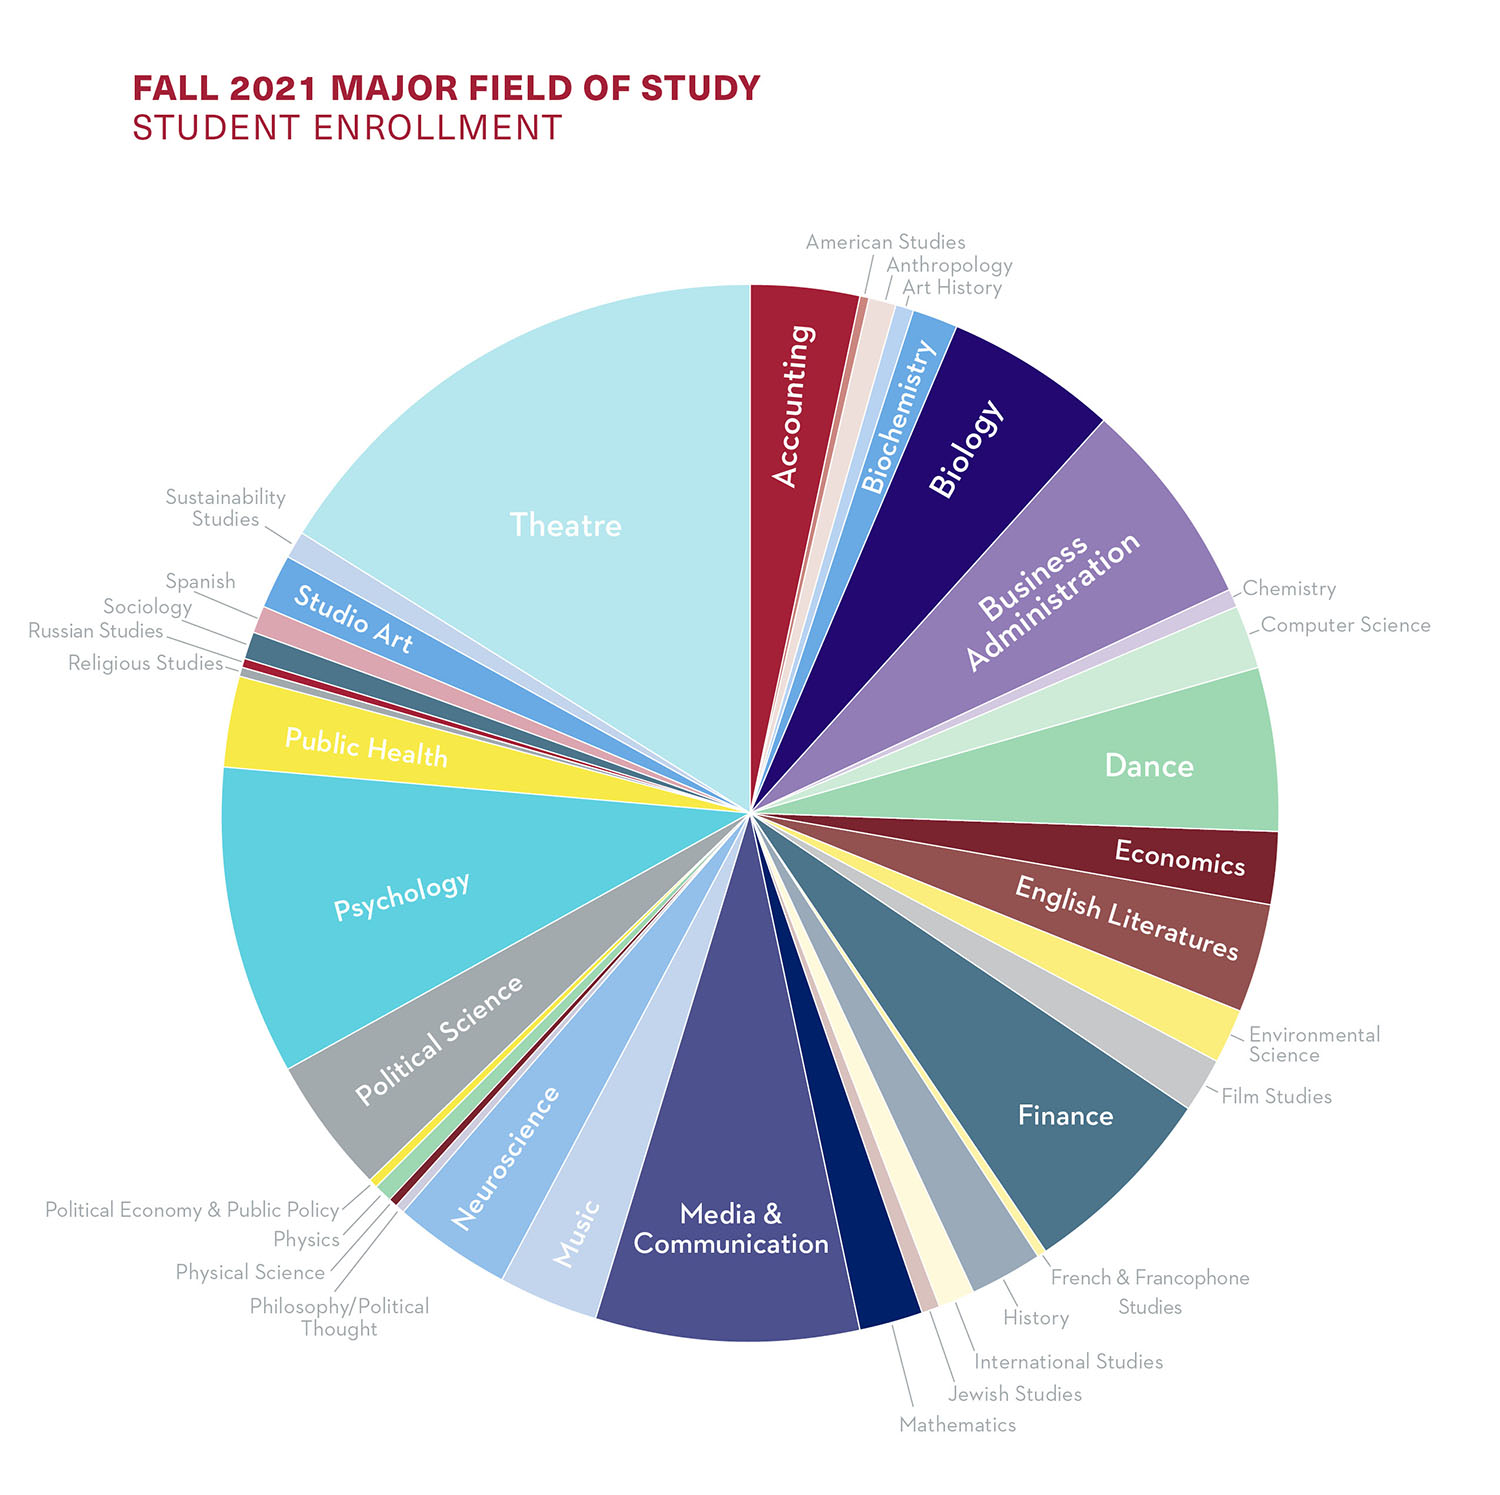 Pie chart showcasing major fields of study. Theatre and Psychology have the largest enrollment.